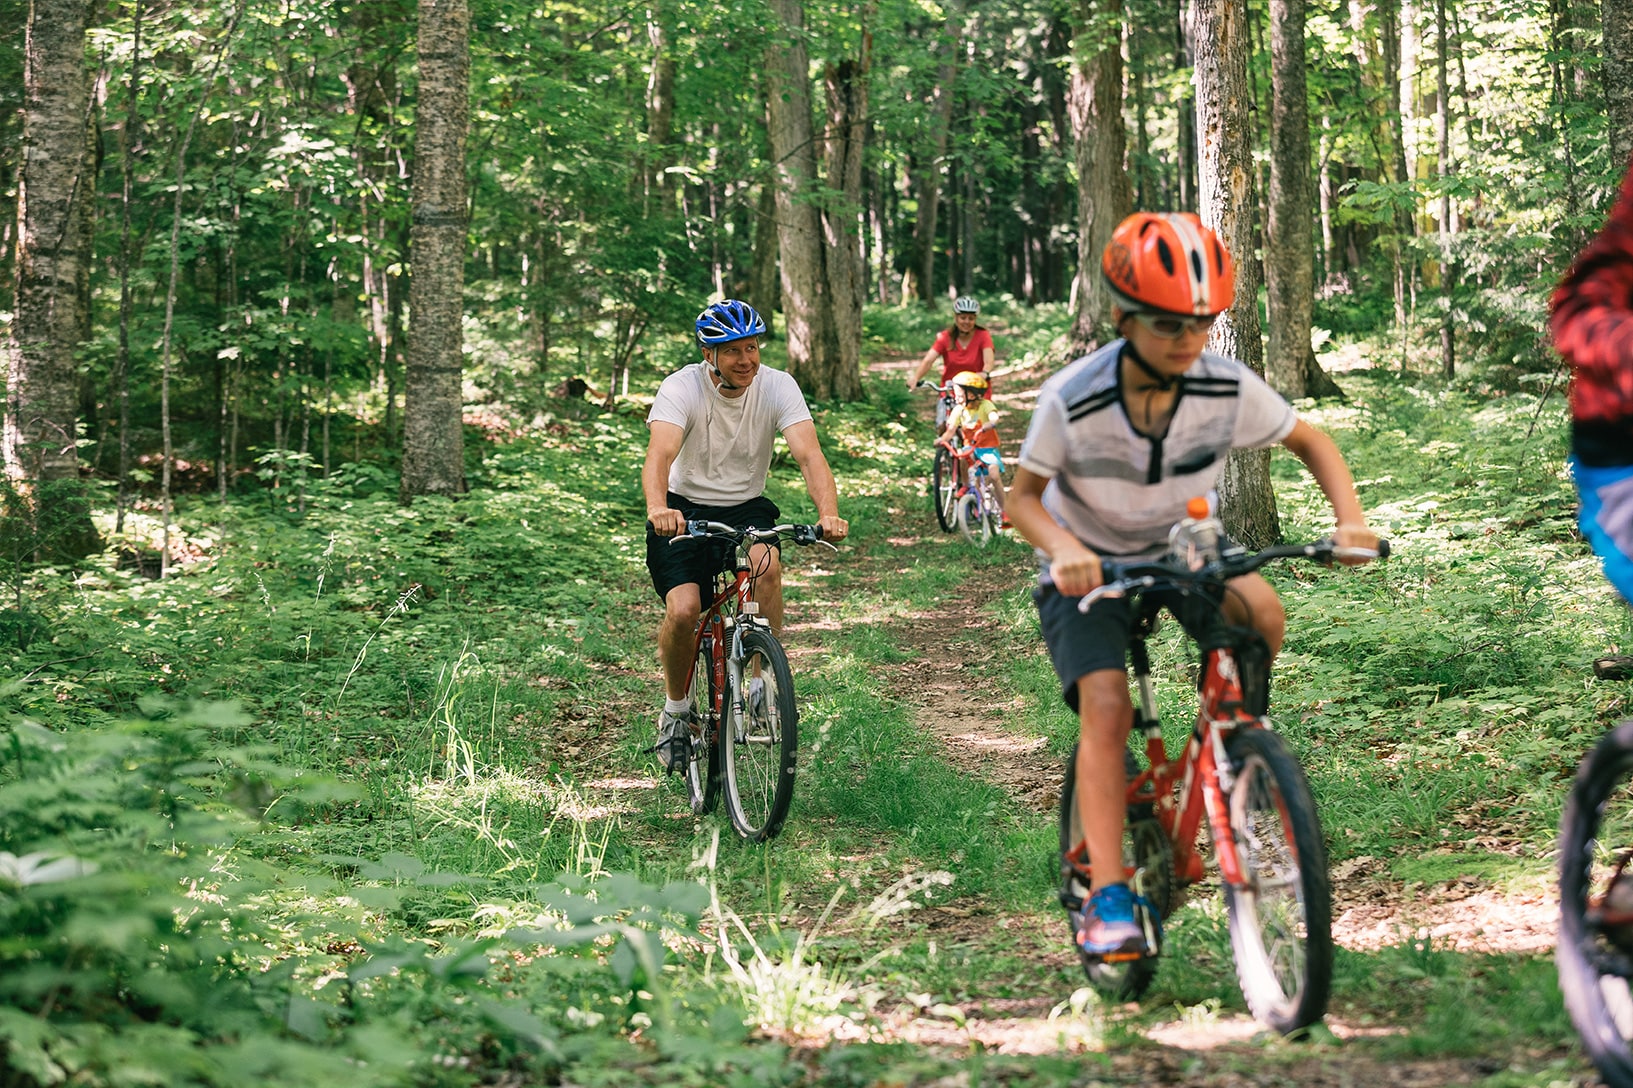 Several people ride bicycles along a forest trail on a sunny day, with lush green trees and foliage surrounding them.